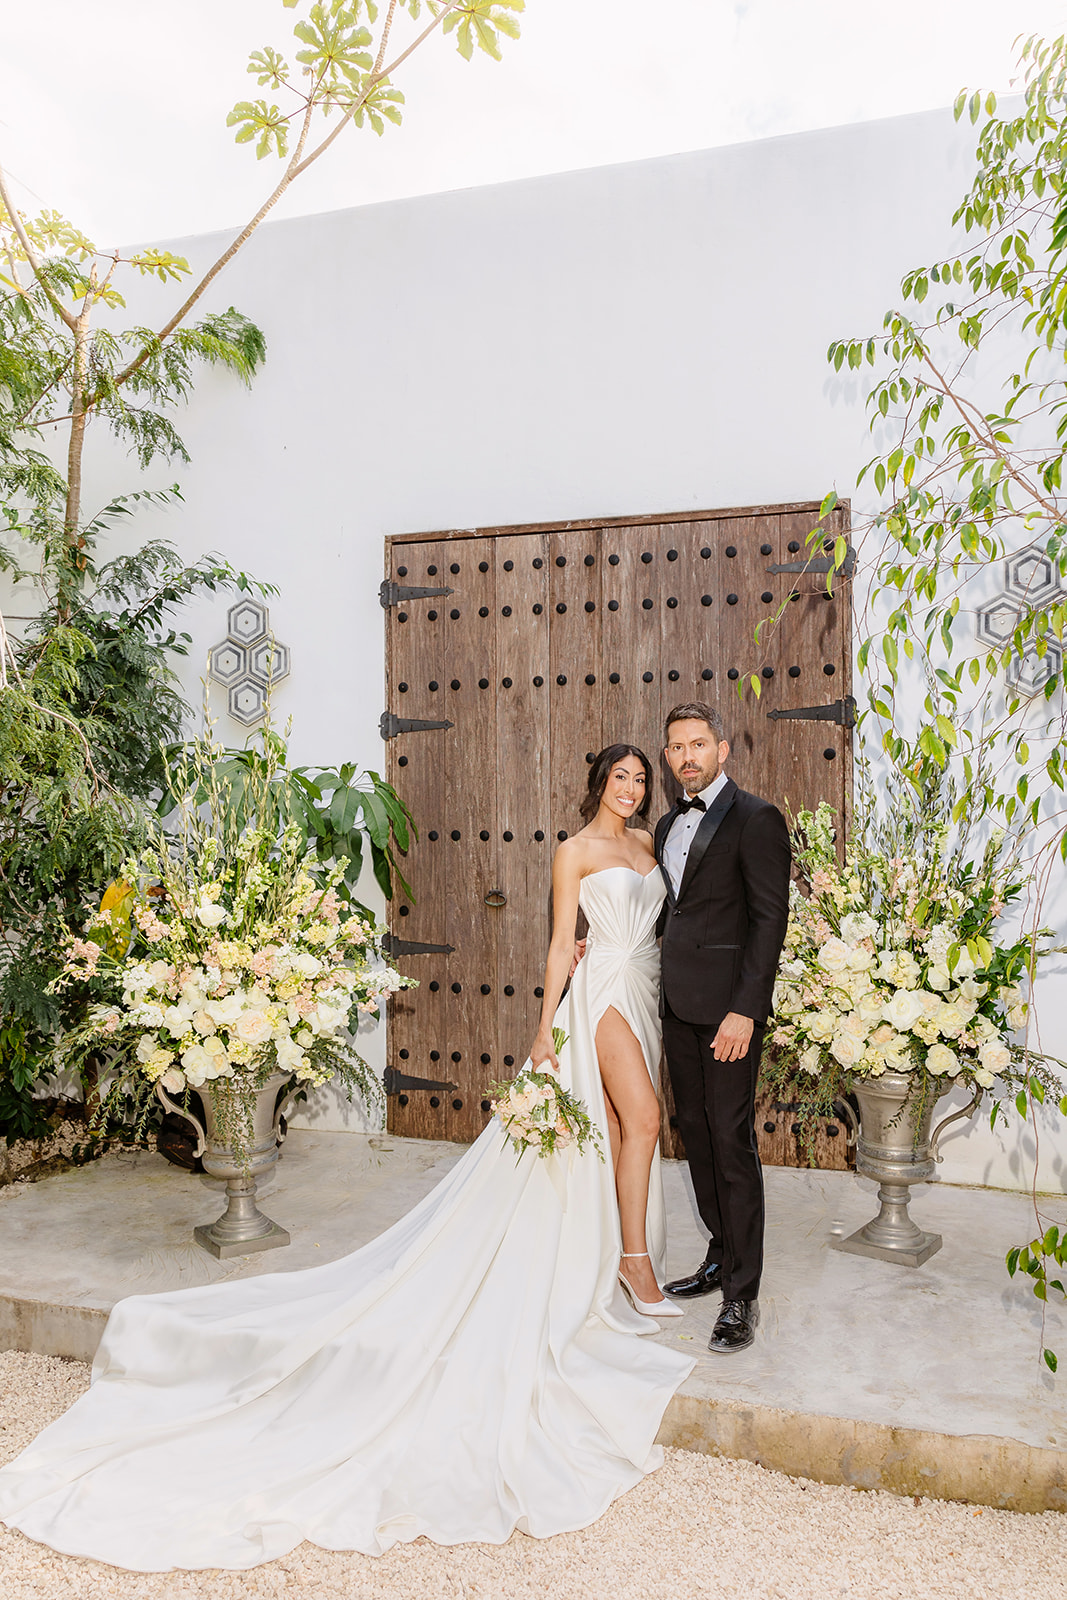 Glam and luxurious bride and groom at Tulum destination wedding 